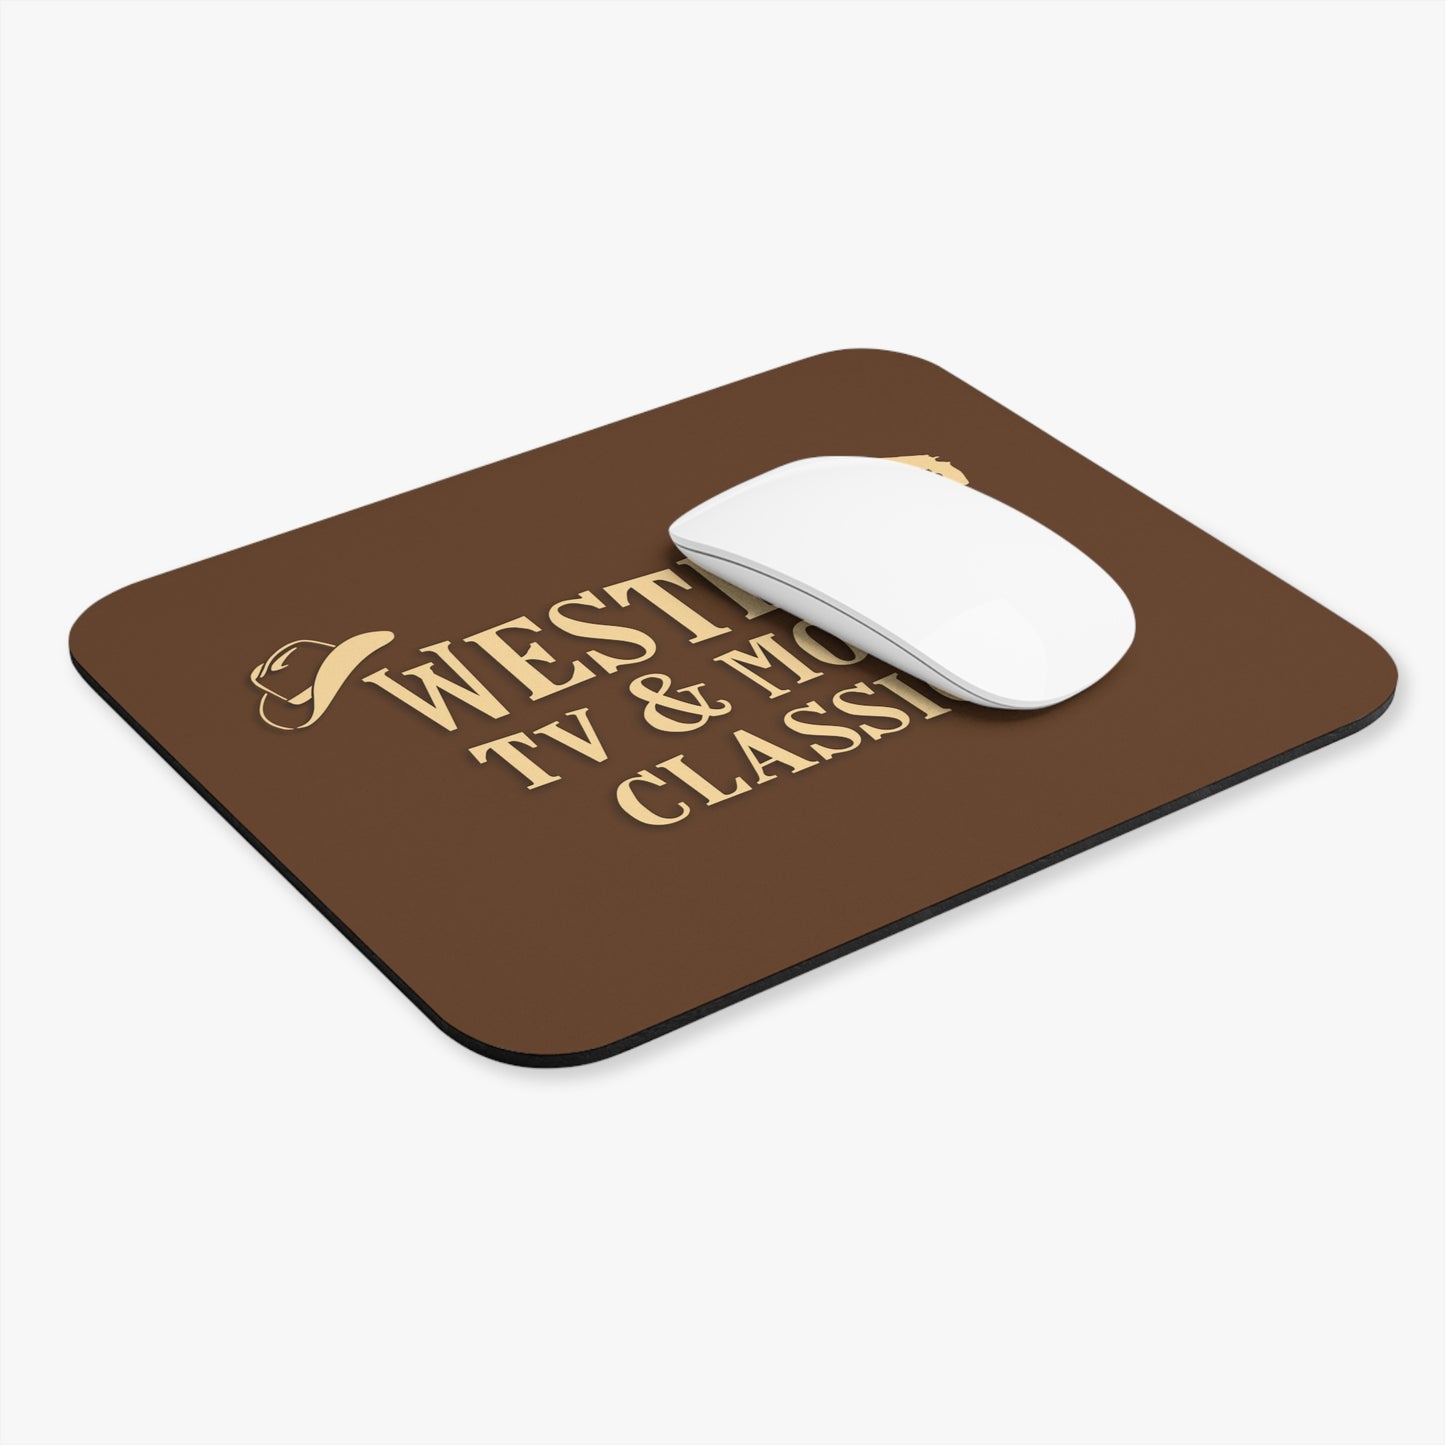 Western TV & Movie Classics -  Mouse Pad (Rectangle)